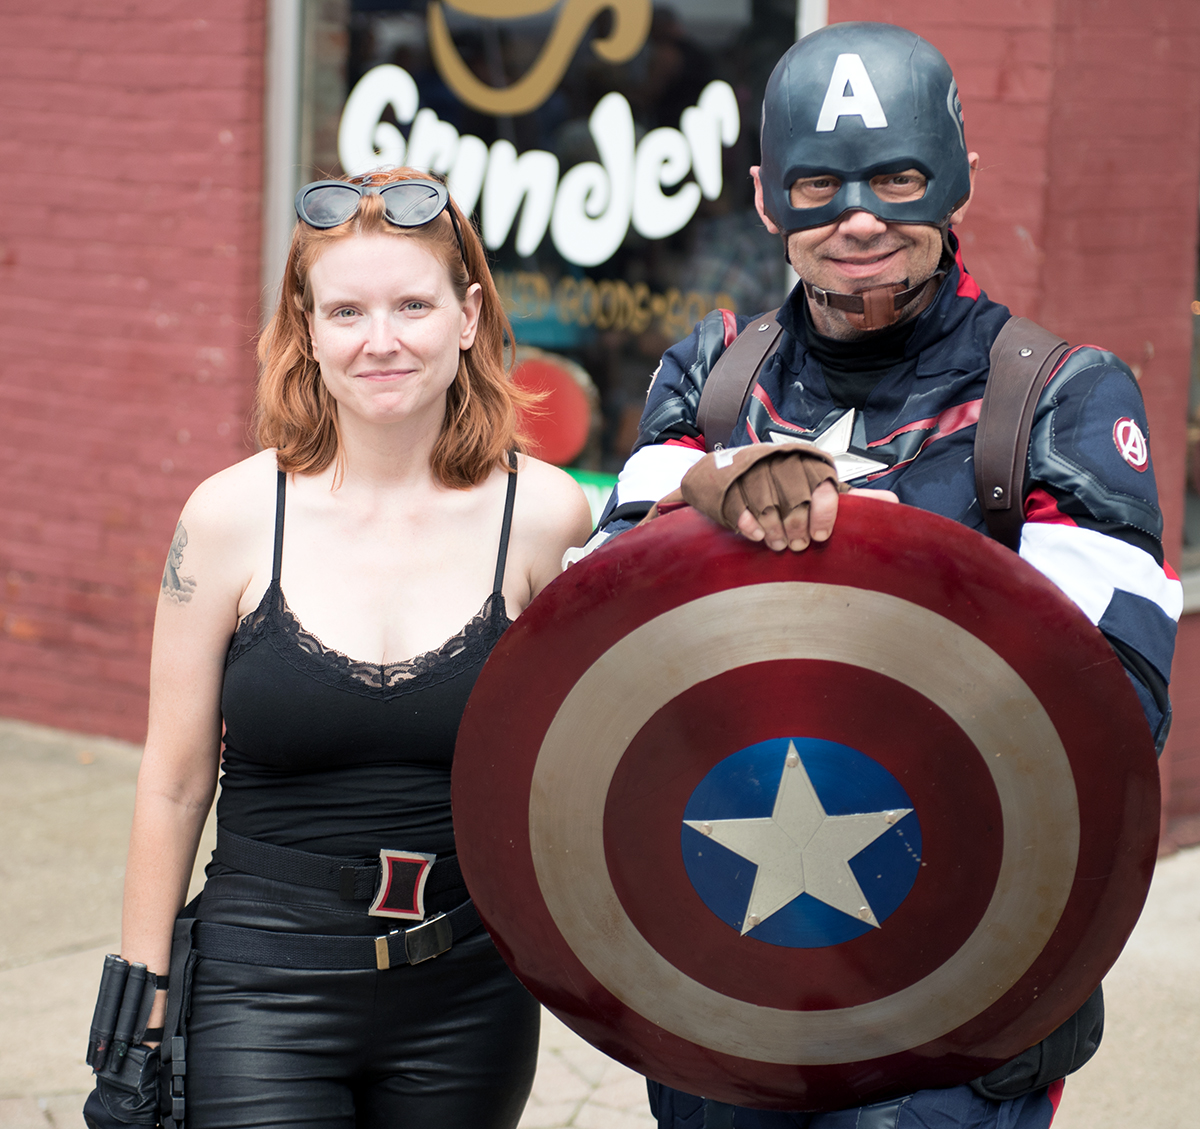 A man dressed as Captain America and a woman dressed as Black Widow from the Marvel Avenger’s series pose for pictures at the Mothman Festival in Point Pleasant, W. Virgina on Saturday, Sept. 19, 2015. (Jeffrey Zide/WOUB)